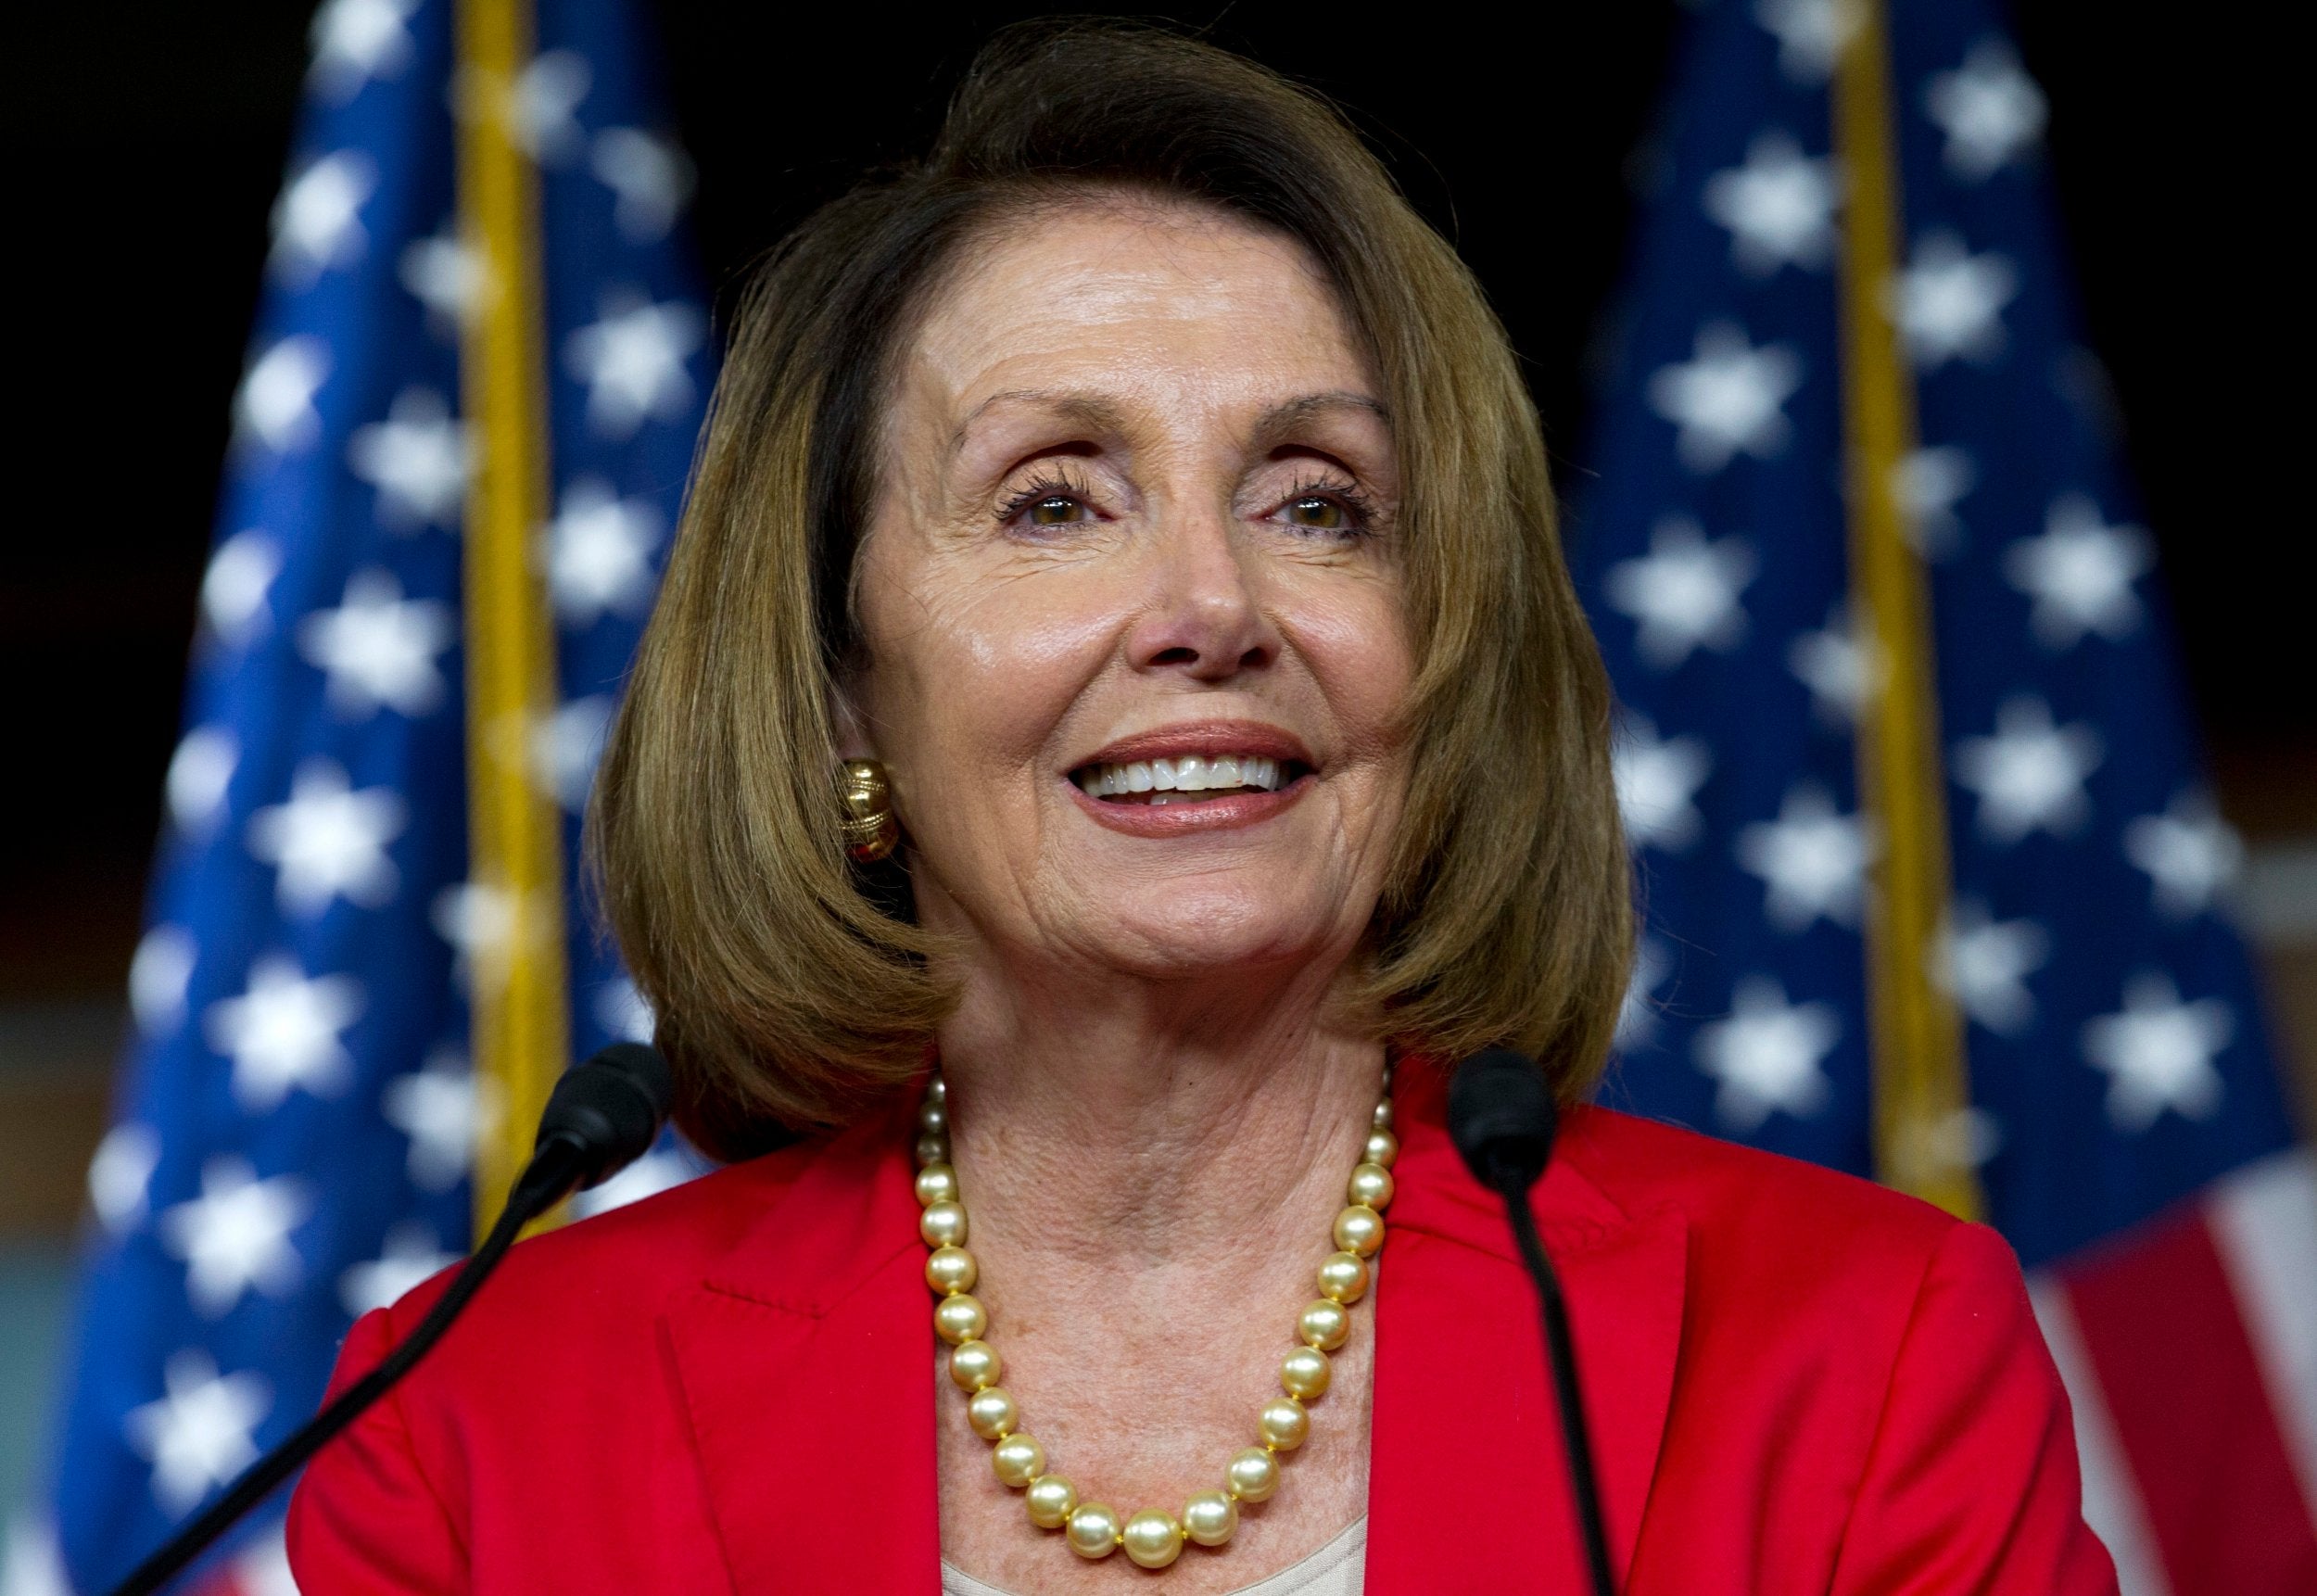 House Democratic Leader Nancy Pelosi was hounded by protesters when she made a campaign stop in South Florida (AP Photo/Jose Luis Magana, File)